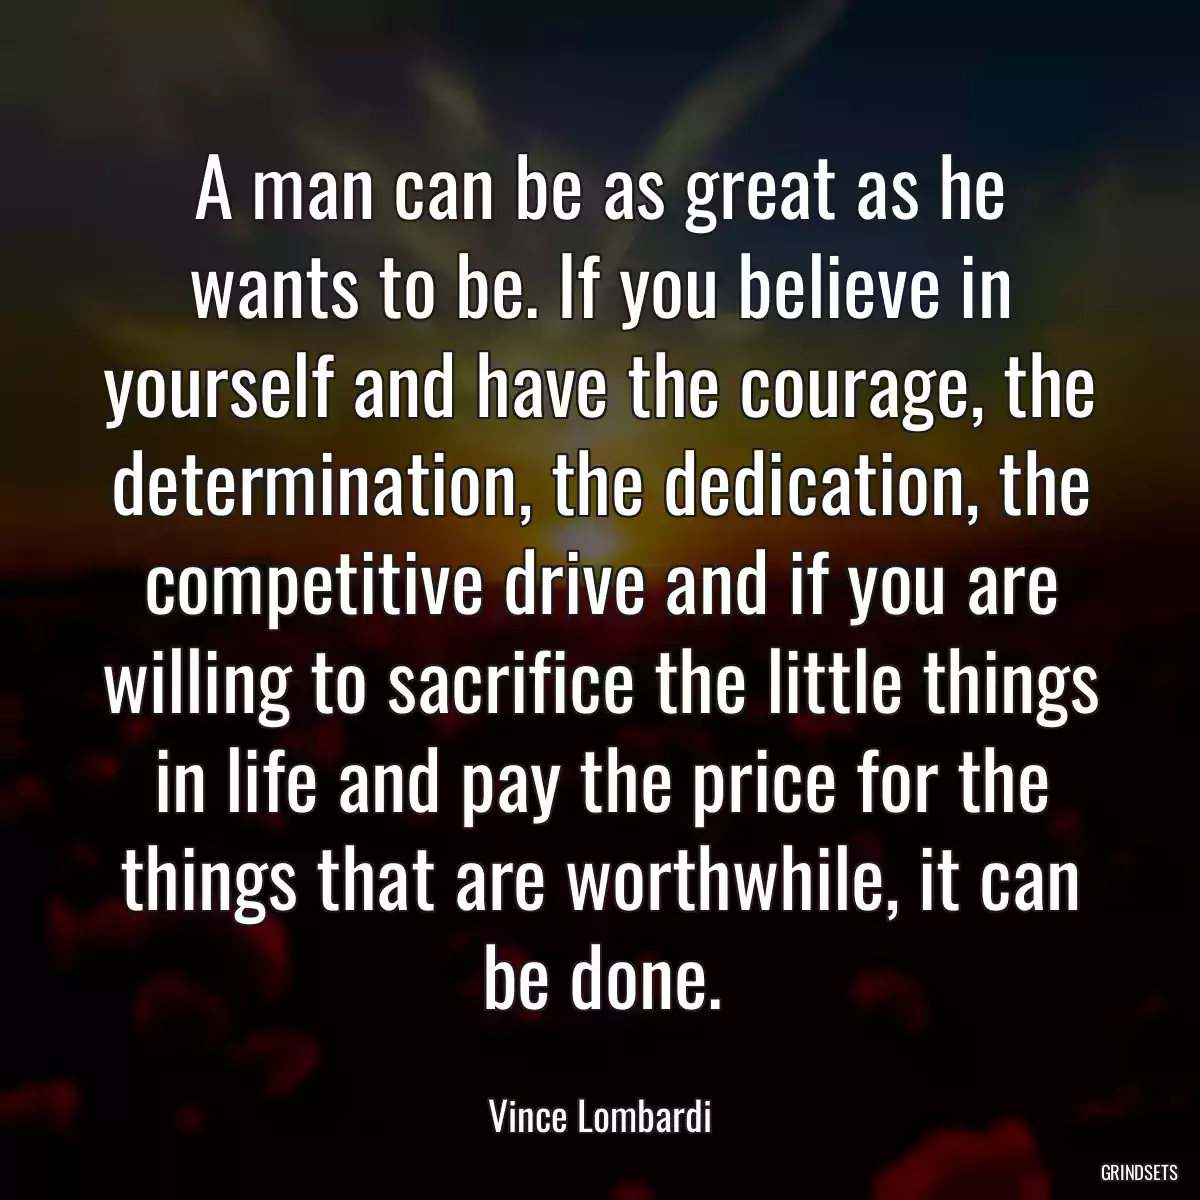 A man can be as great as he wants to be. If you believe in yourself and have the courage, the determination, the dedication, the competitive drive and if you are willing to sacrifice the little things in life and pay the price for the things that are worthwhile, it can be done.